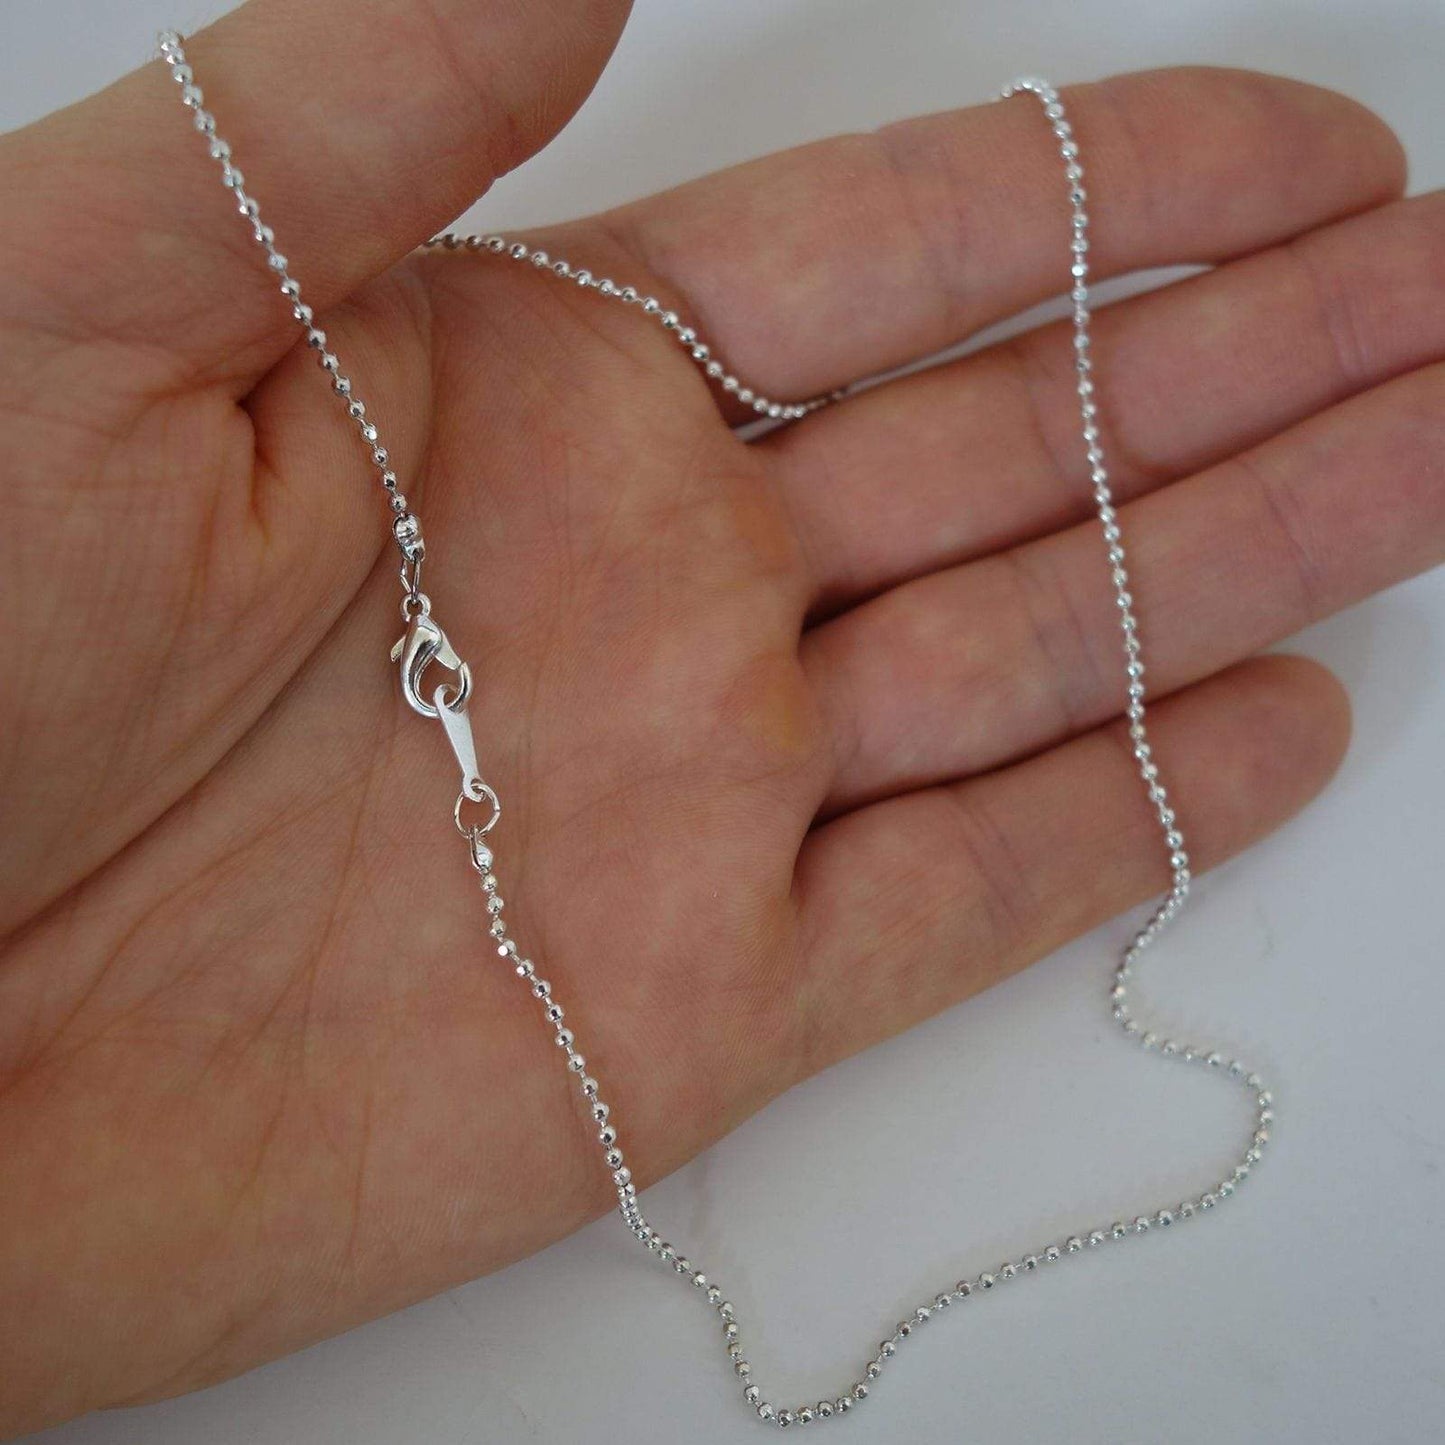 Silver Colour Steel Chain Metal Necklace Mens Ladies Girls Boys Kids Jewellery Silver Colour Steel Chain Metal Necklace Mens Ladies Girls Boys Kids Jewellery